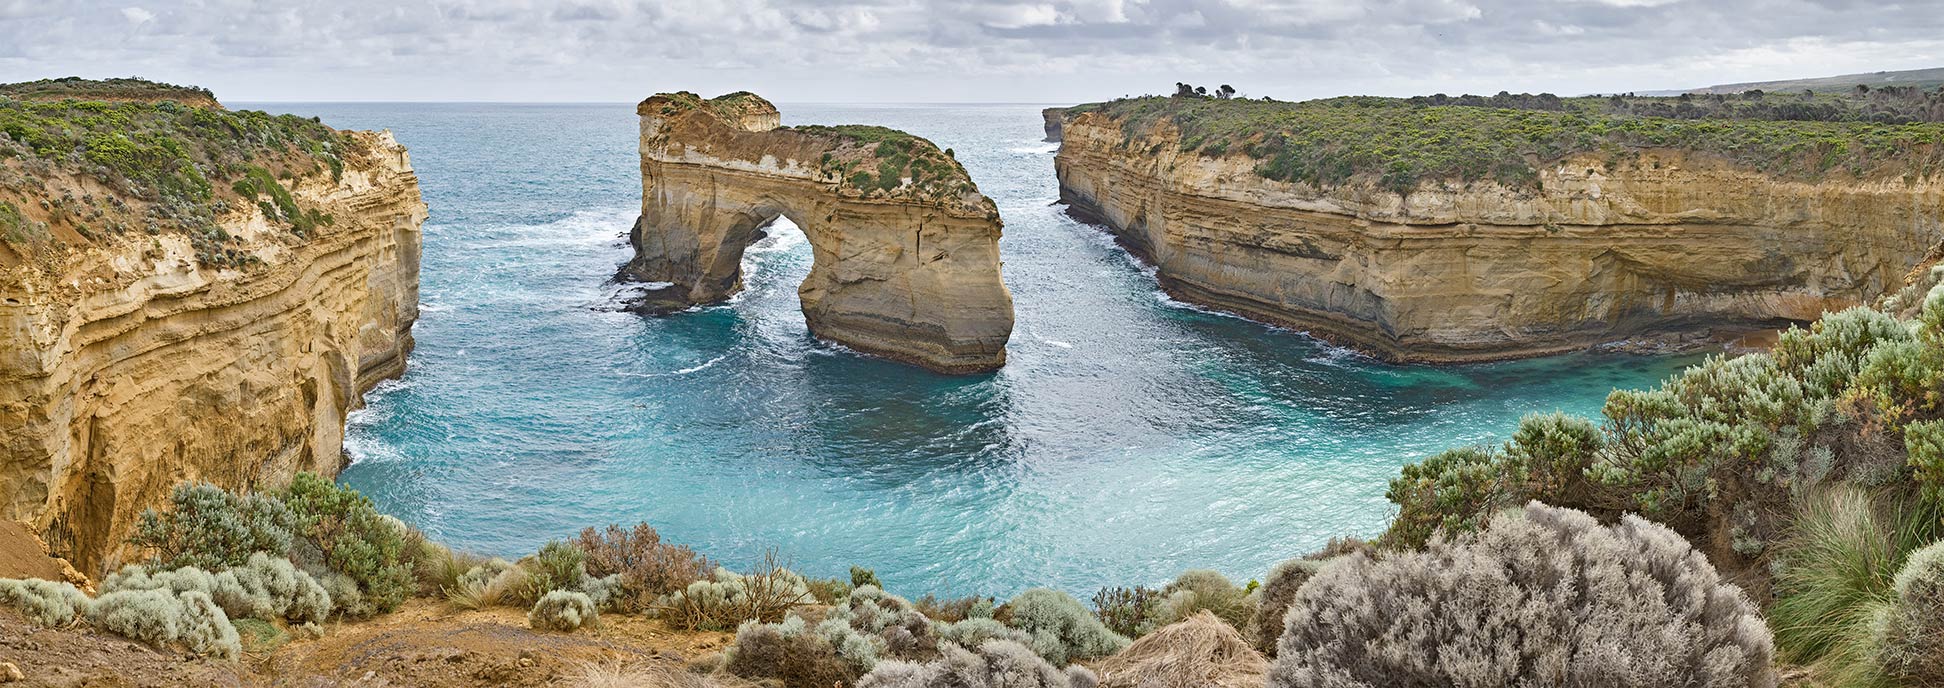 Where the land meets the ocean. Island Archway, Victoria, Australia